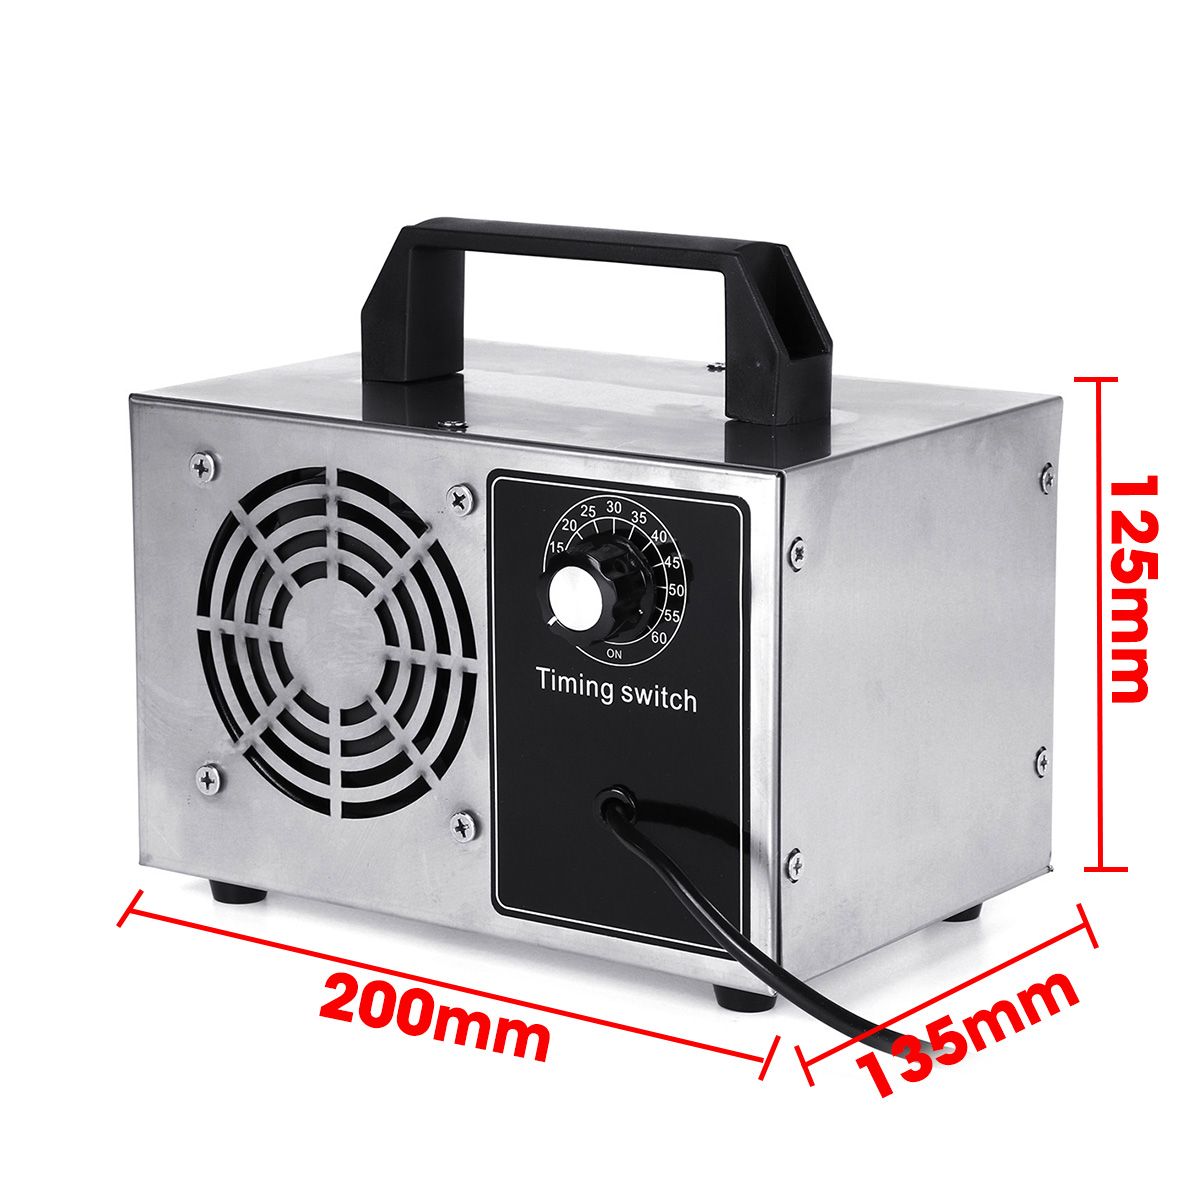 220V-Ozone-Generator-Commercial-Long-Life-Timing-Purifier-Air-Cleaner-Deodorizer-1710921